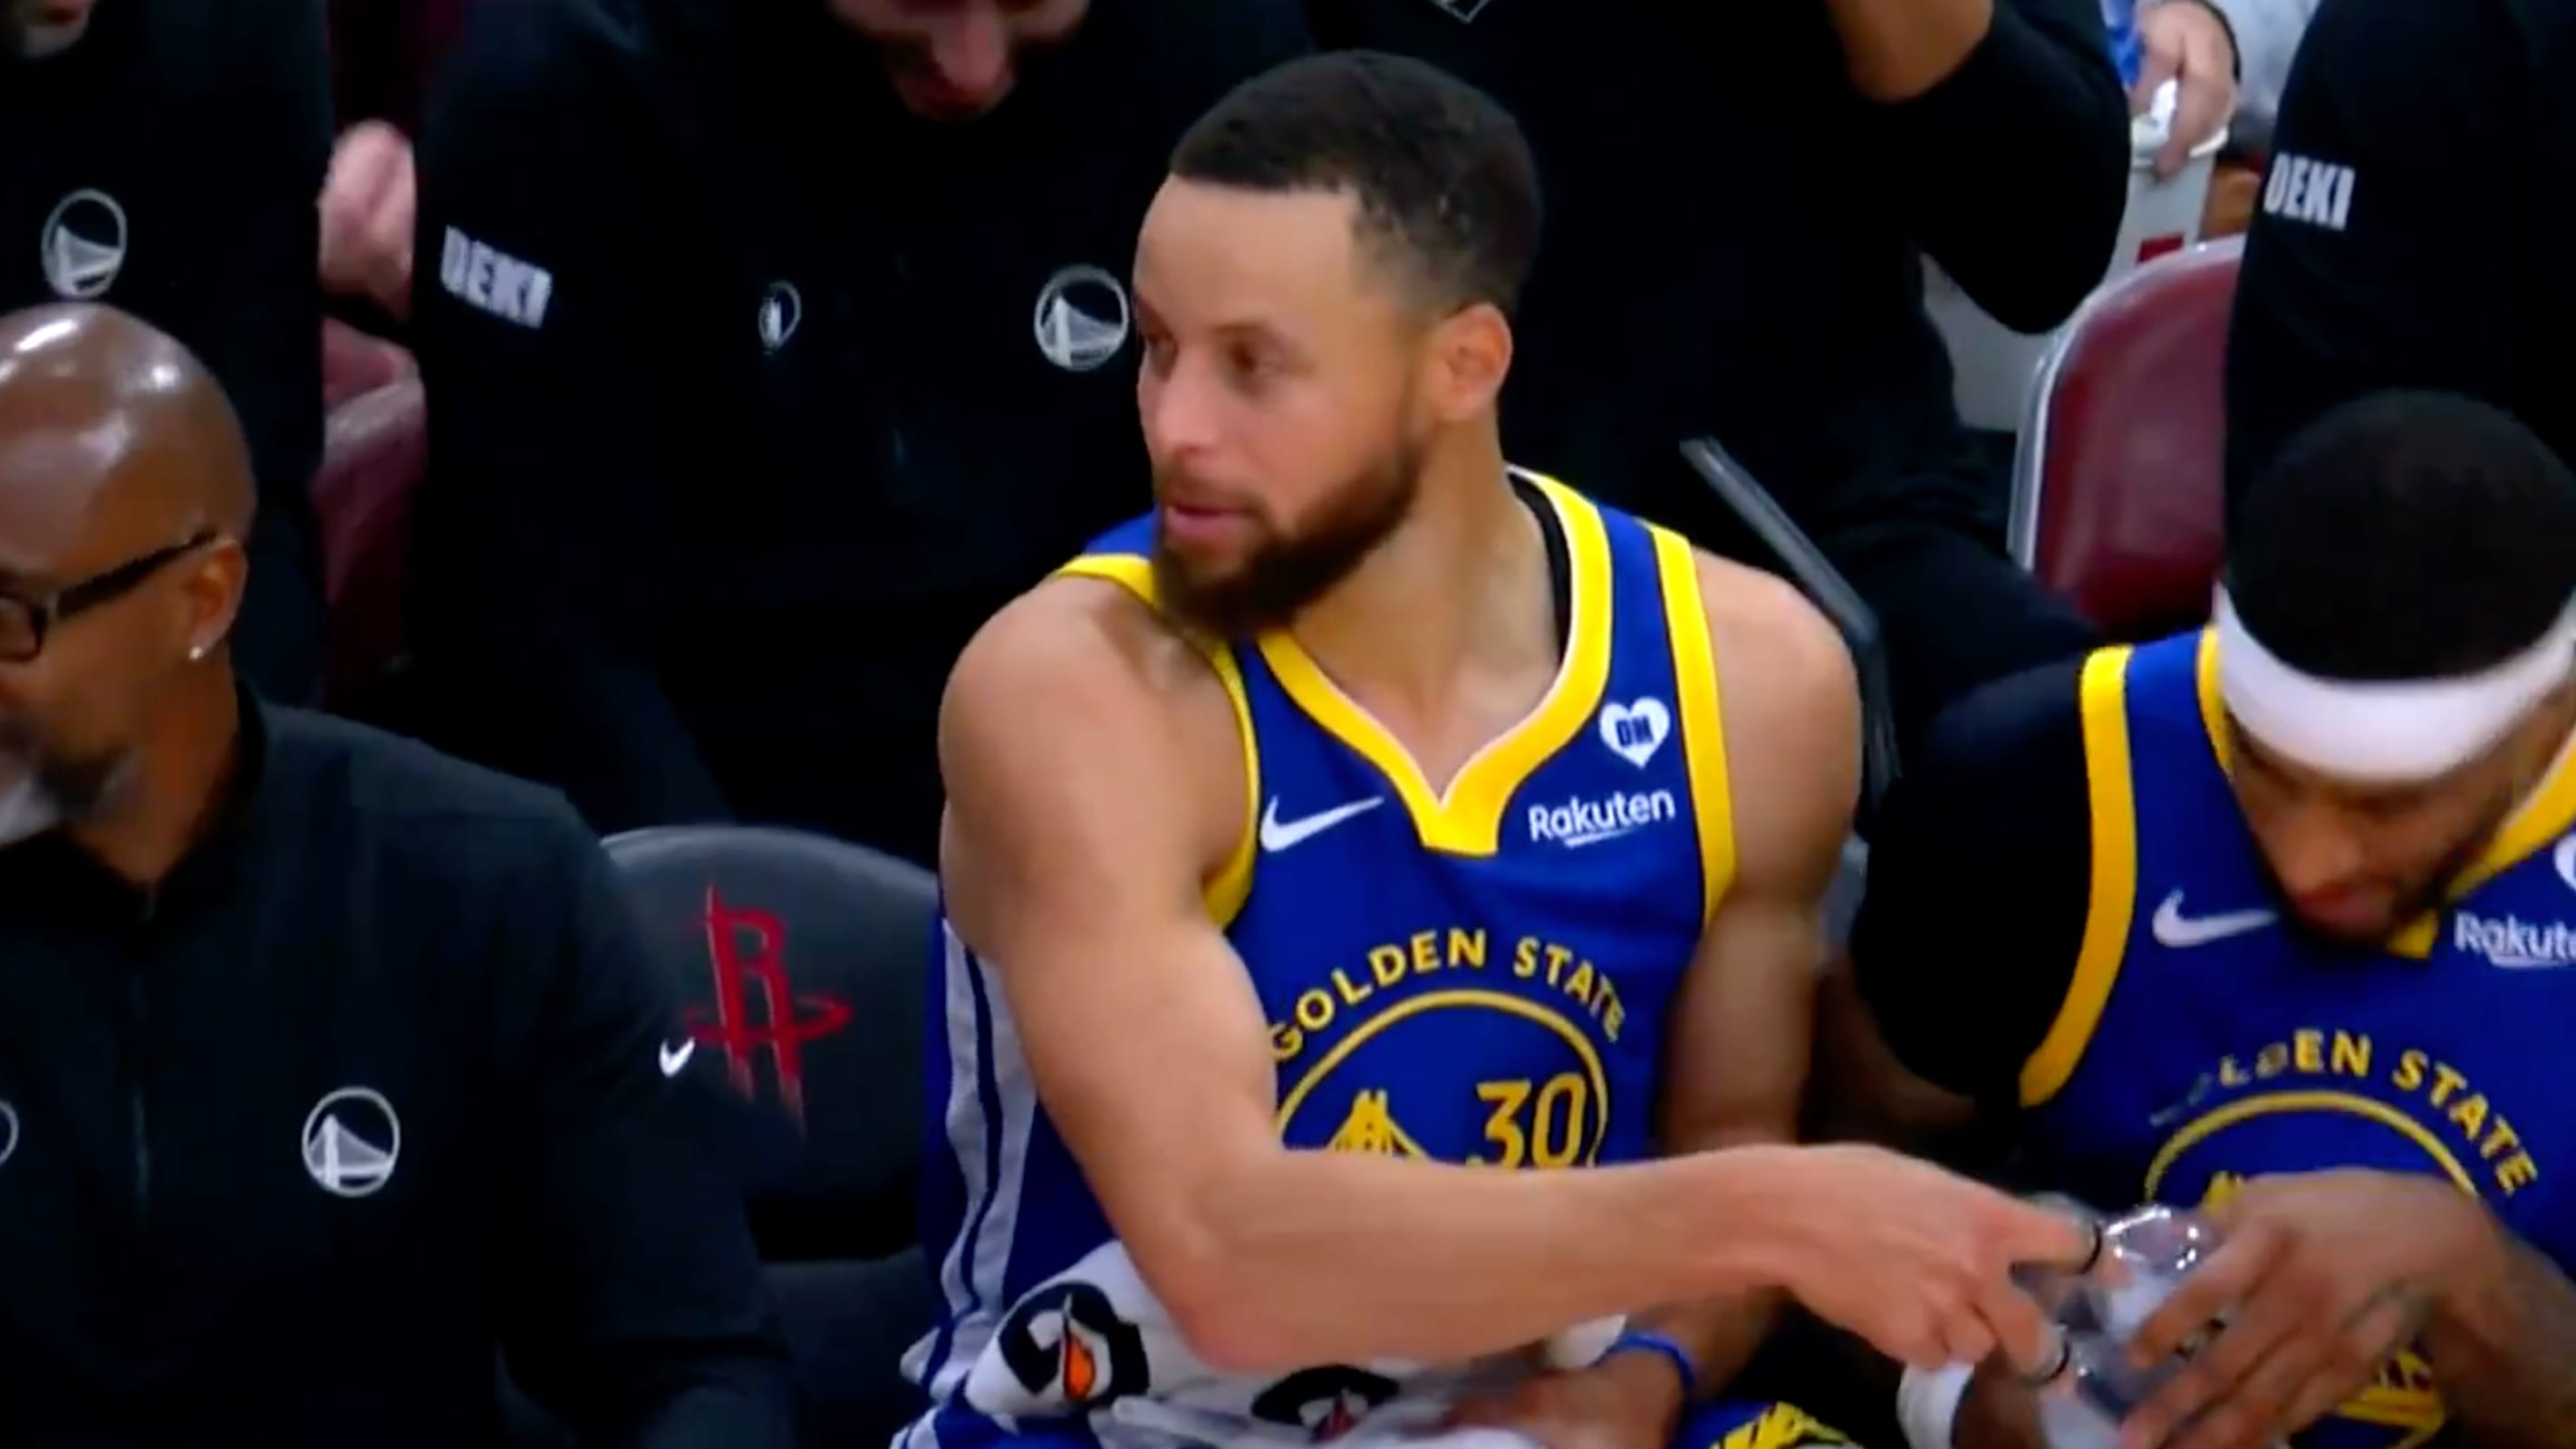 Steph Curry celebrates a basket on the bench in unique fashion.